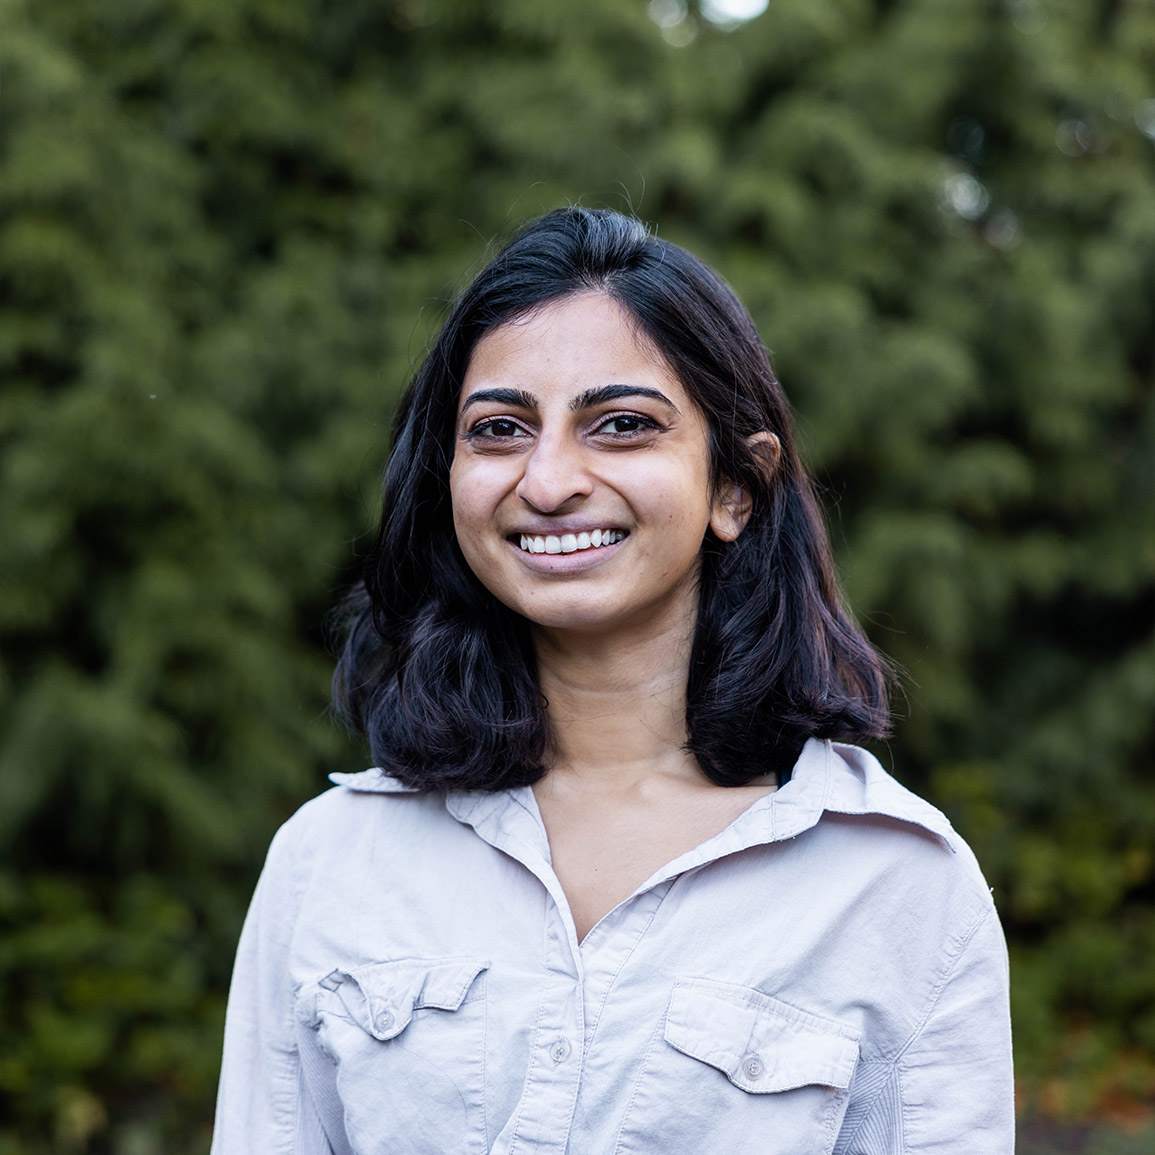 Raincoast Fellow and Masters of Science student Ishana Shukla looks at the camera, her hair is black and shoulder-length, wearing a light grey cotton button-up shirt.